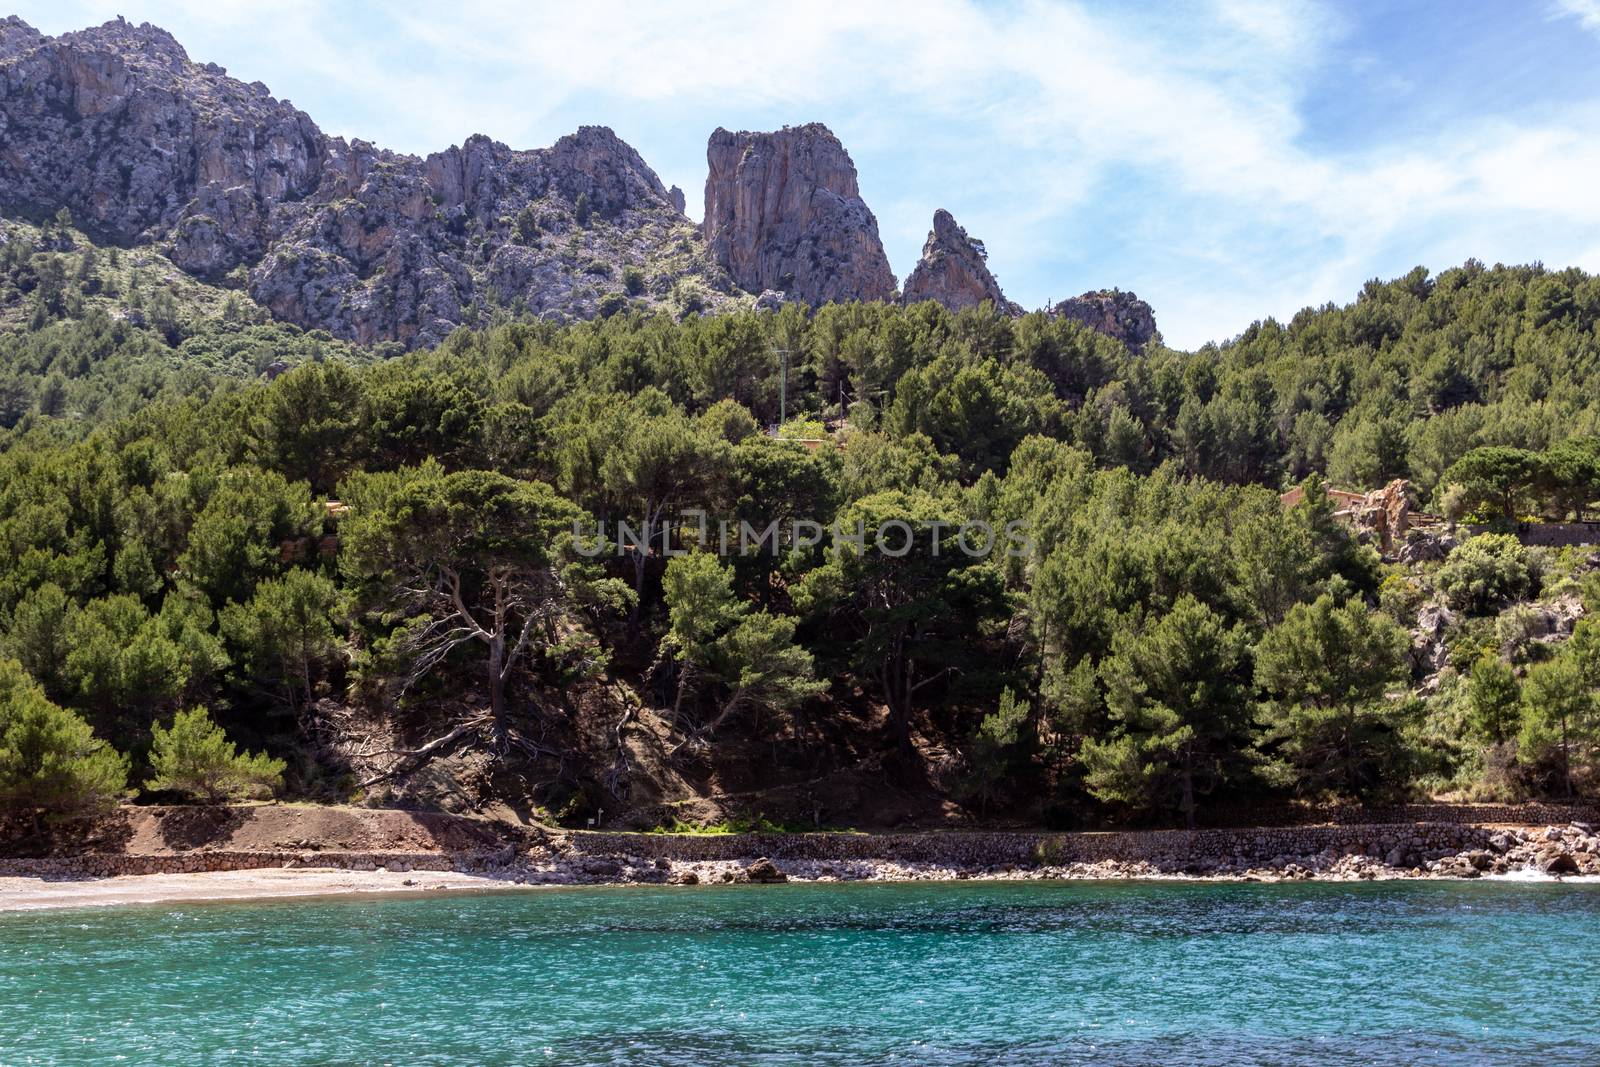 Bay Cala Tuent at Mallorca, Spain by reinerc